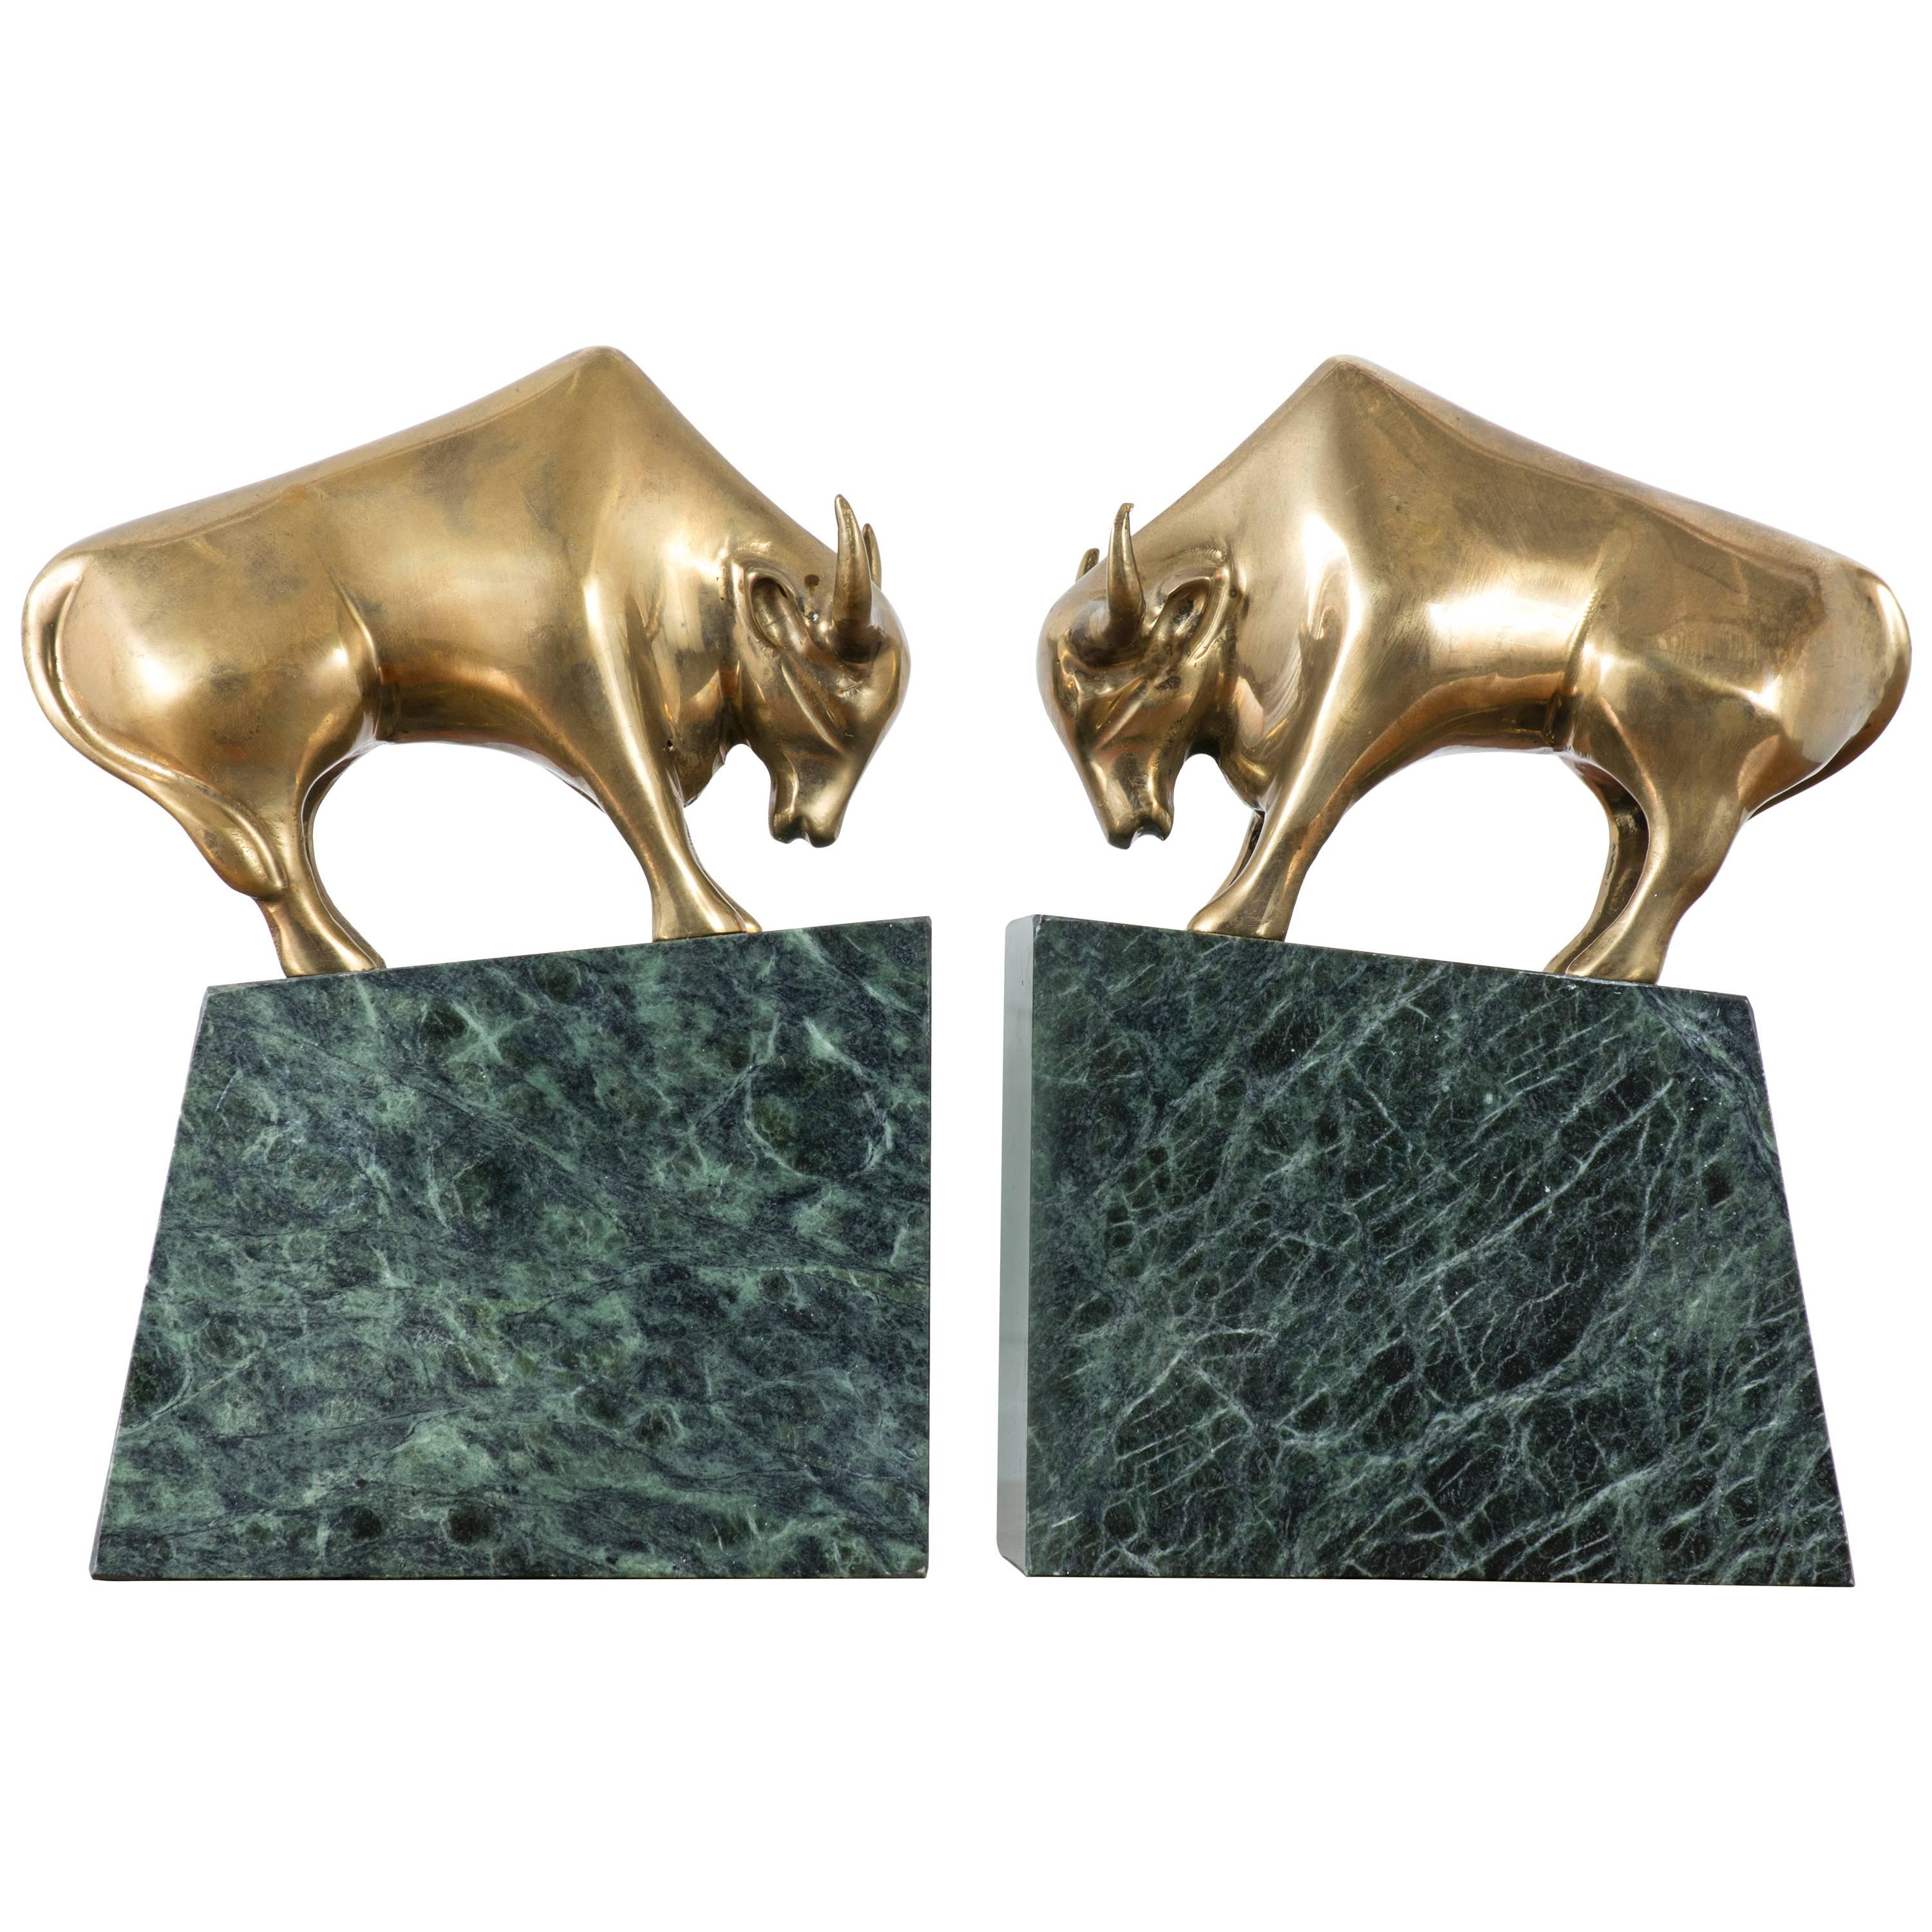 Pair of Vintage Bull Bookends